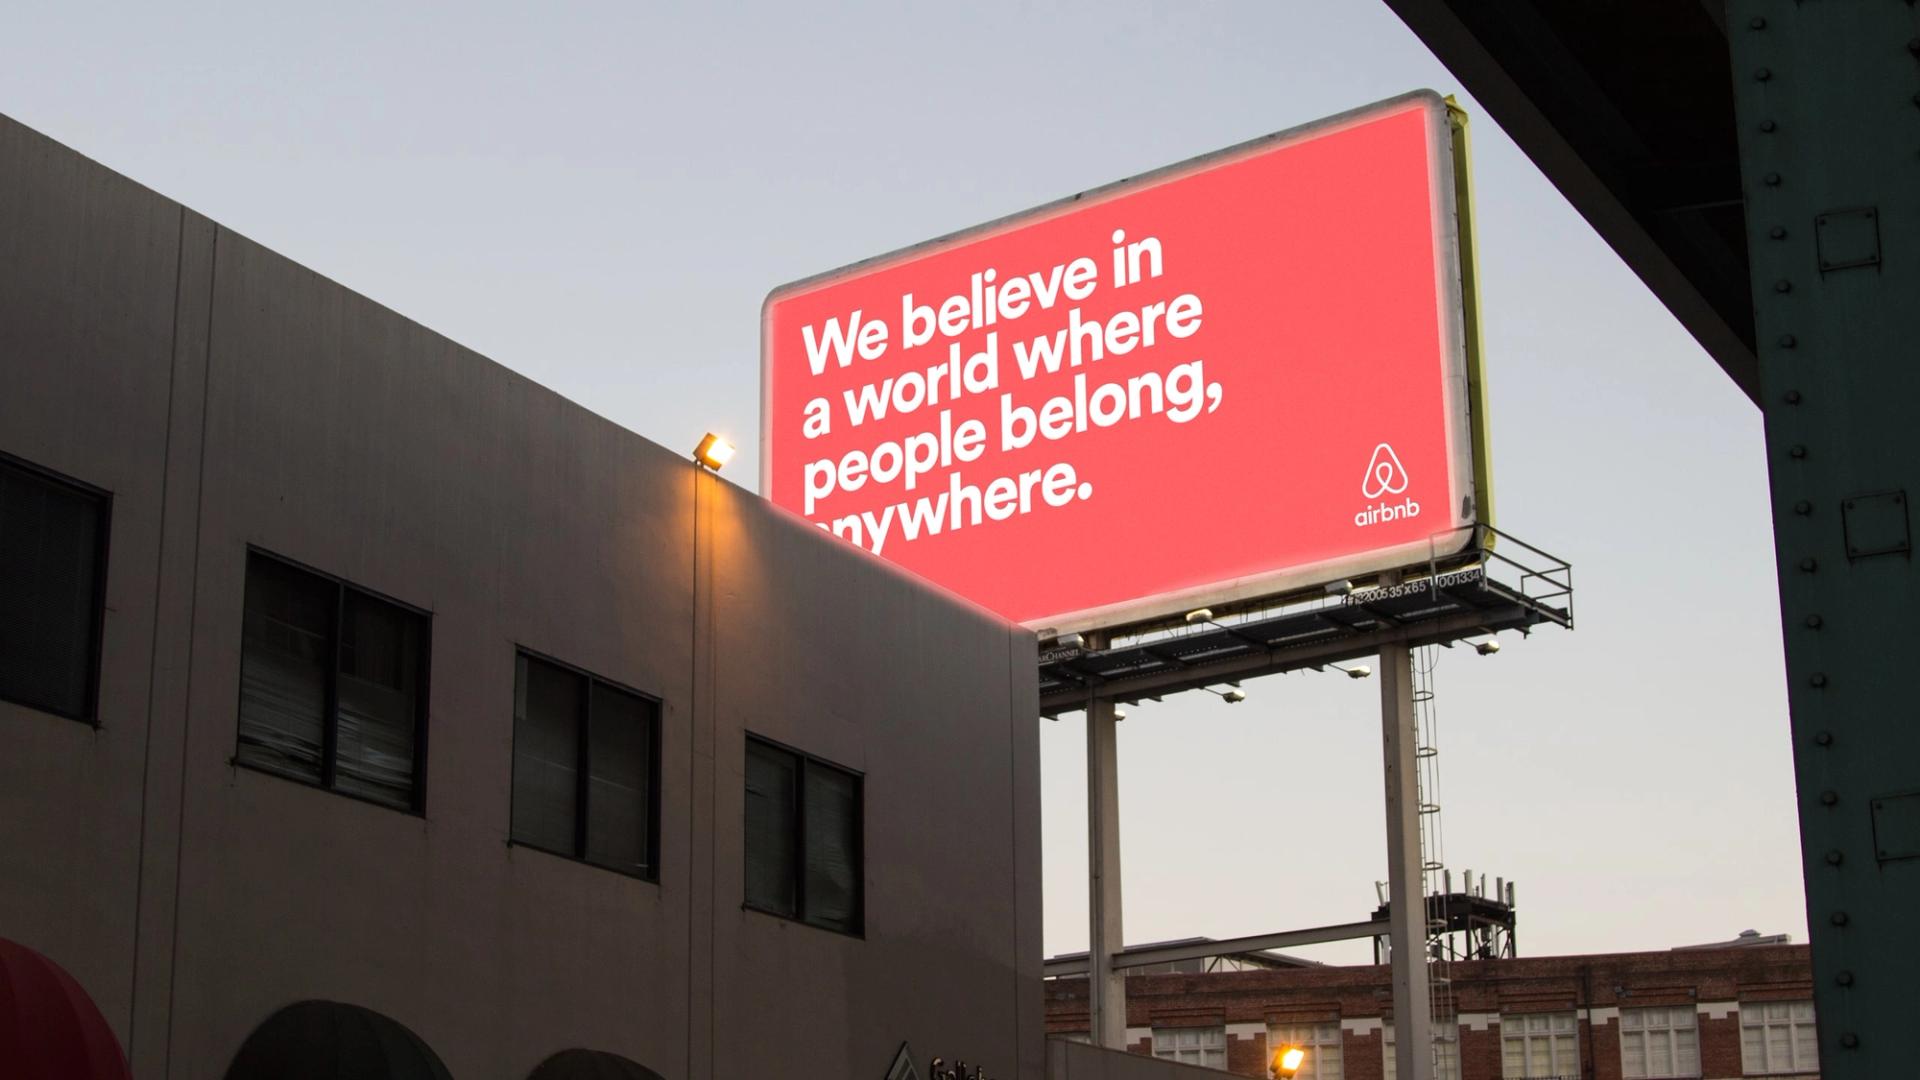 An Airbnb billboard that reads, “We believe in a world where people belong, anywhere.”